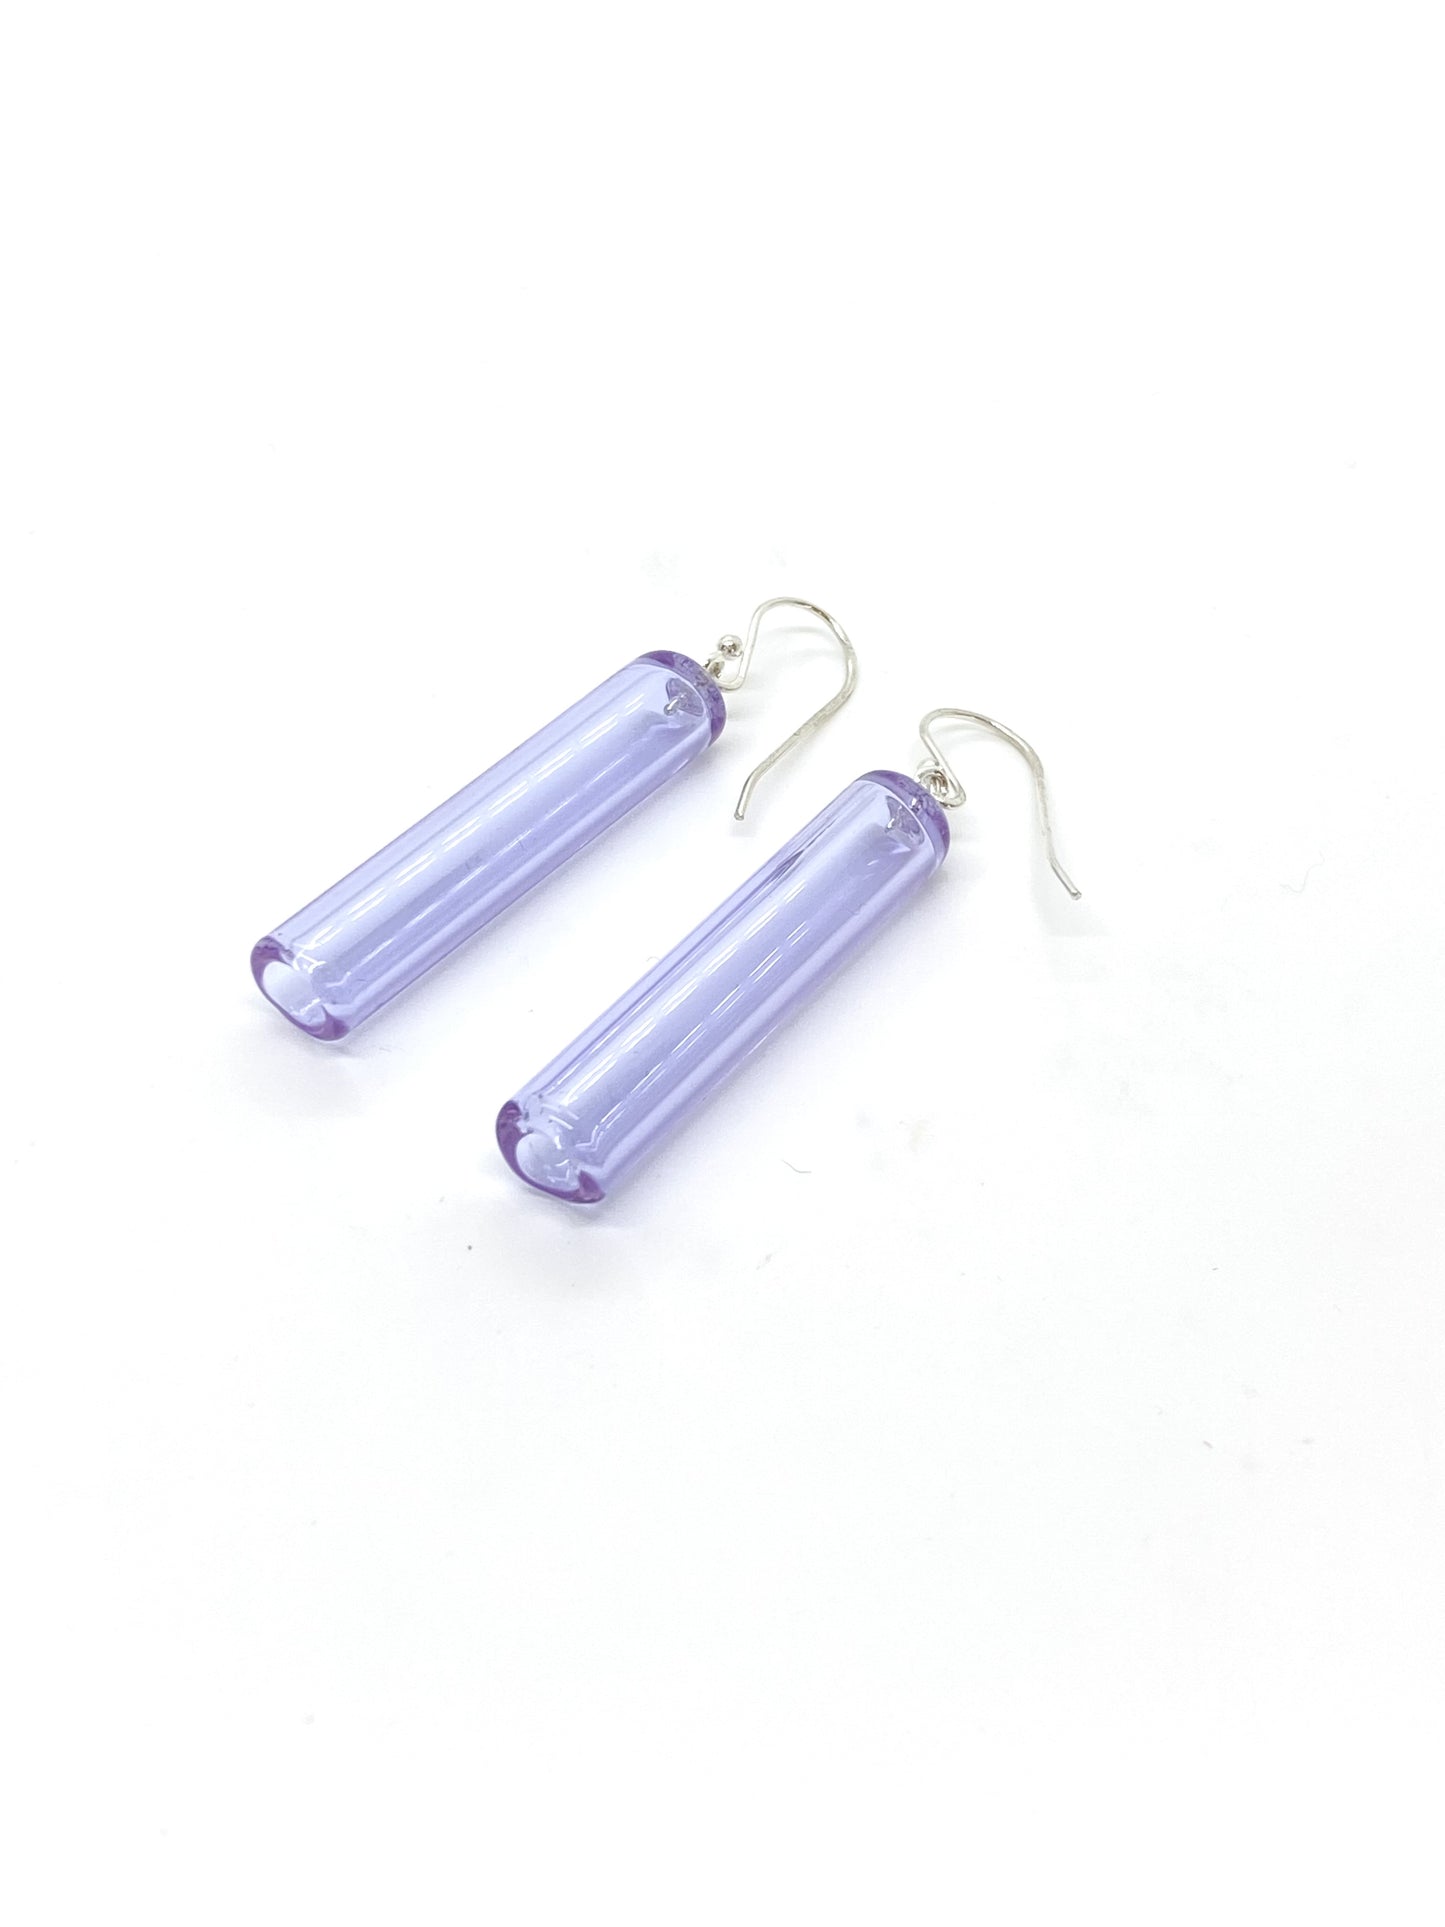 Glass Cylinder & Sterling Silver Earrings - Lilac